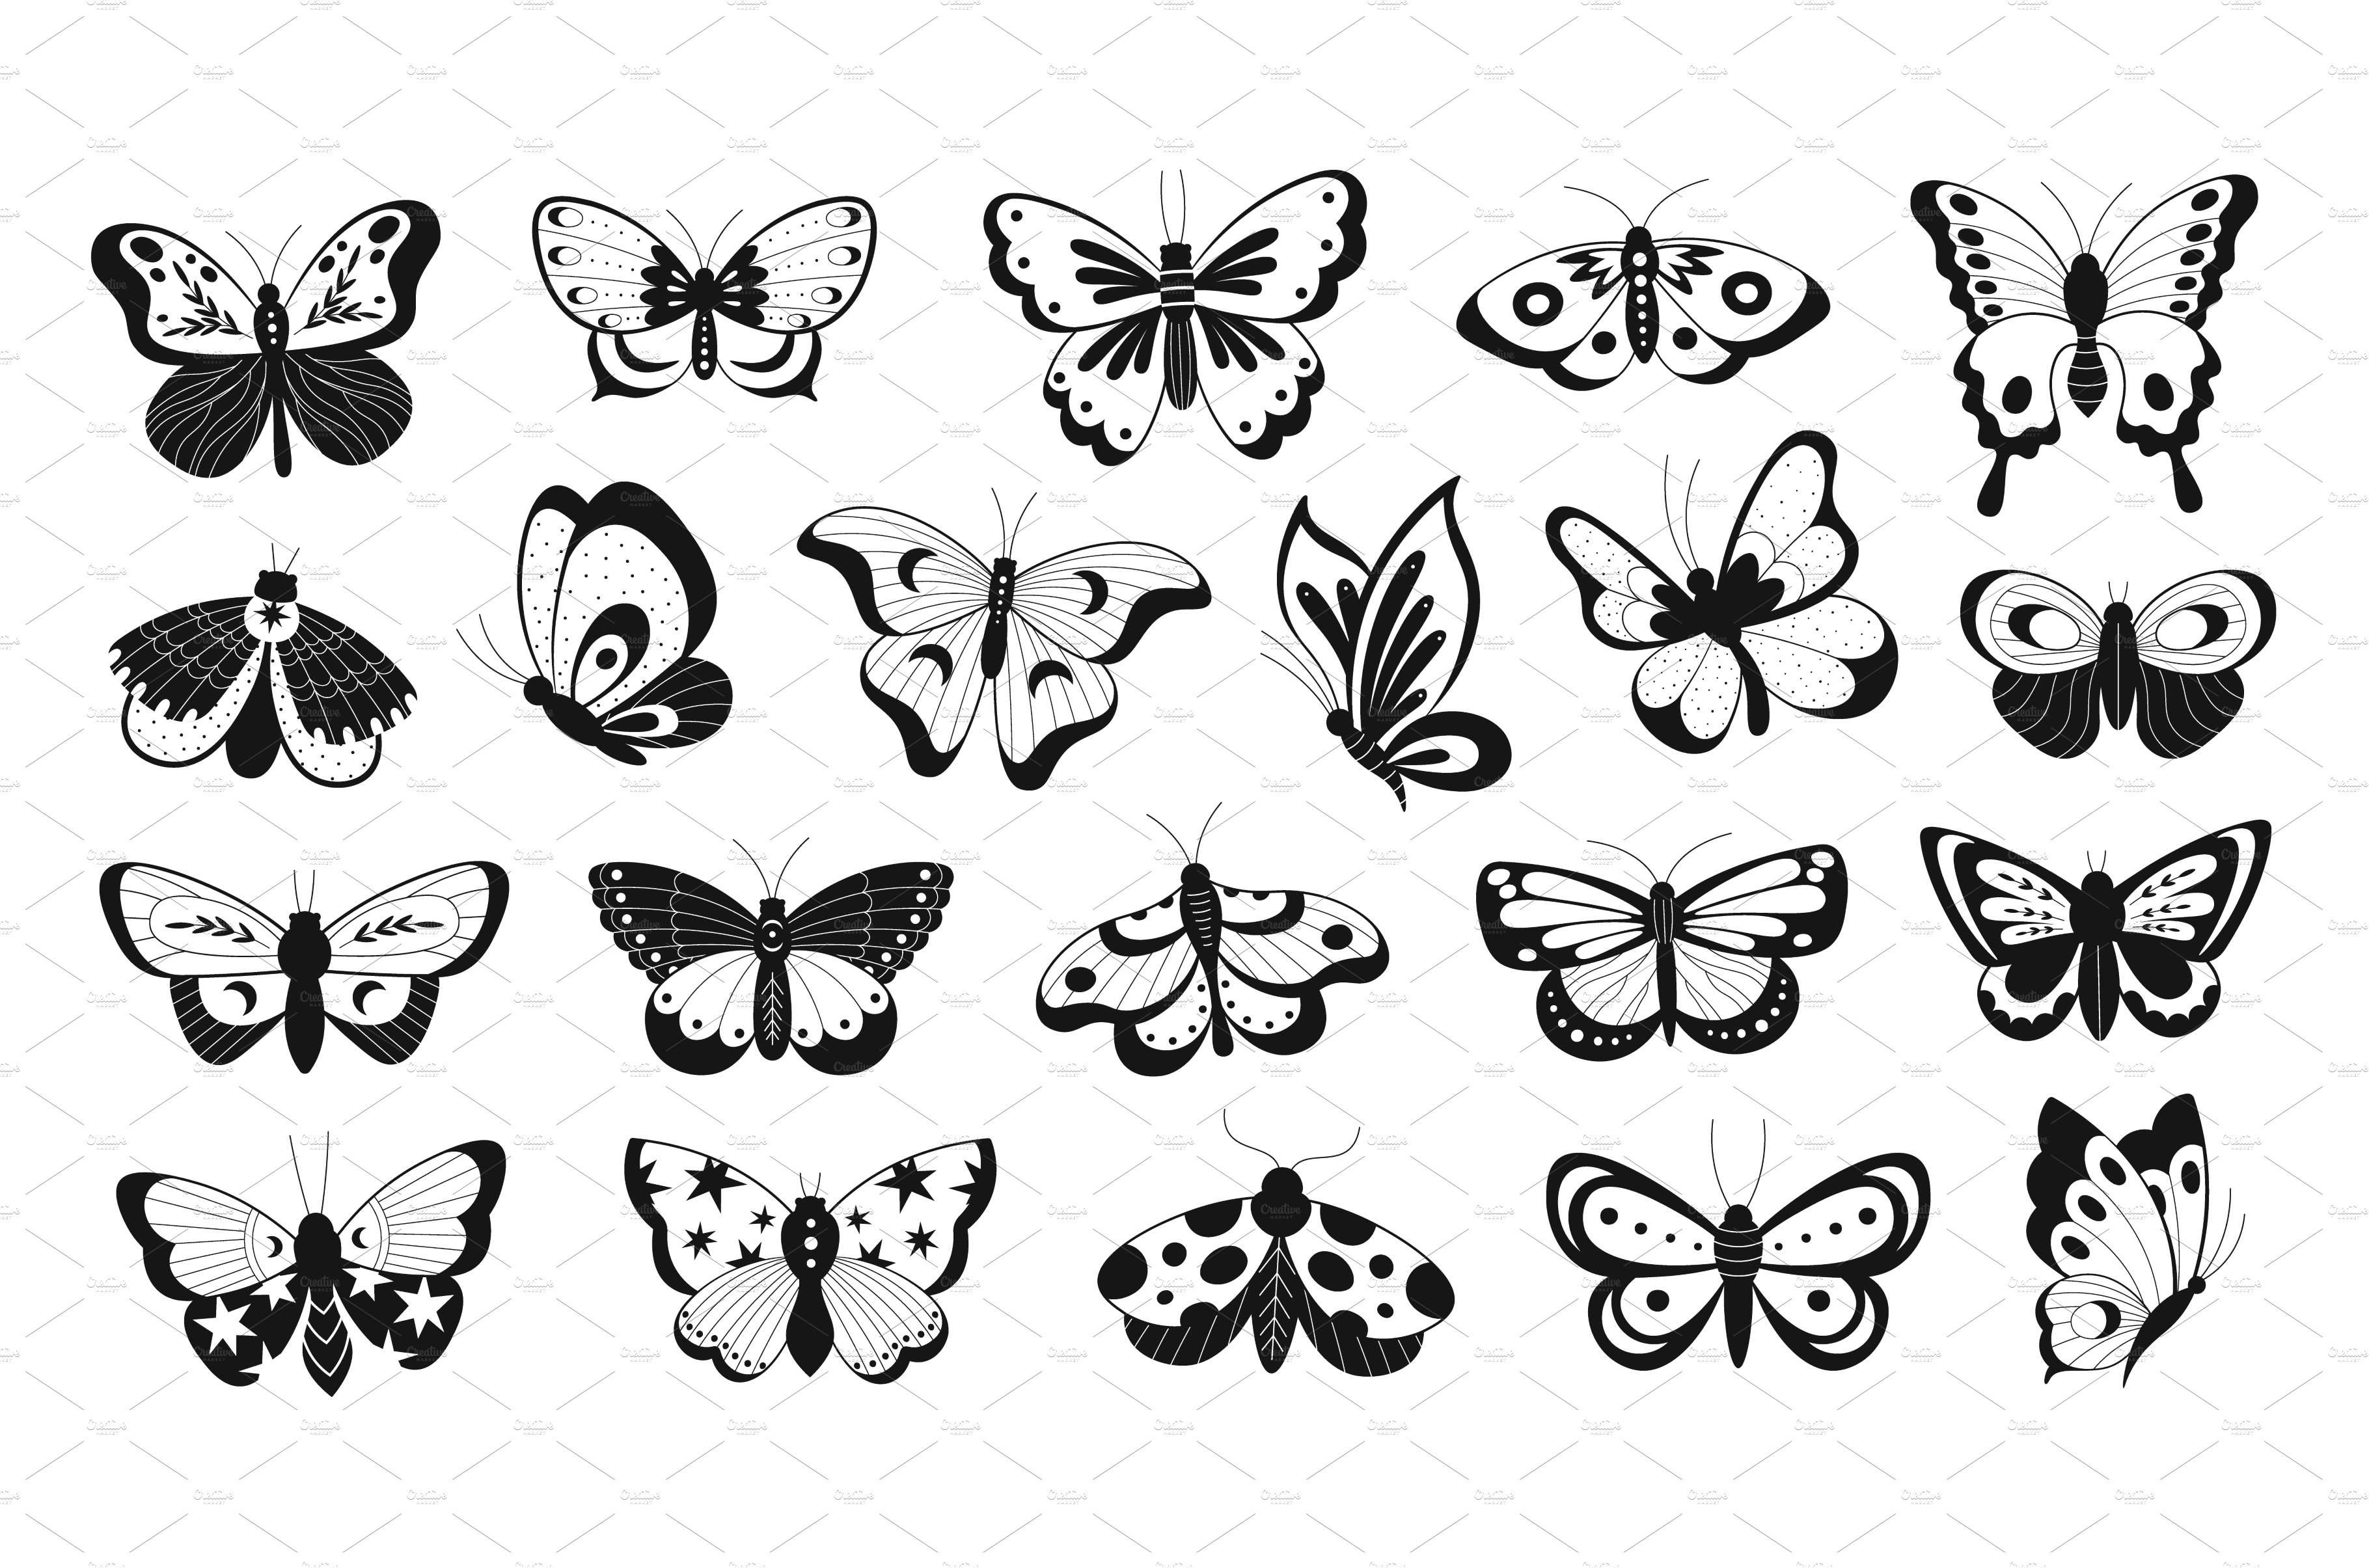 Abstract butterflies black cover image.